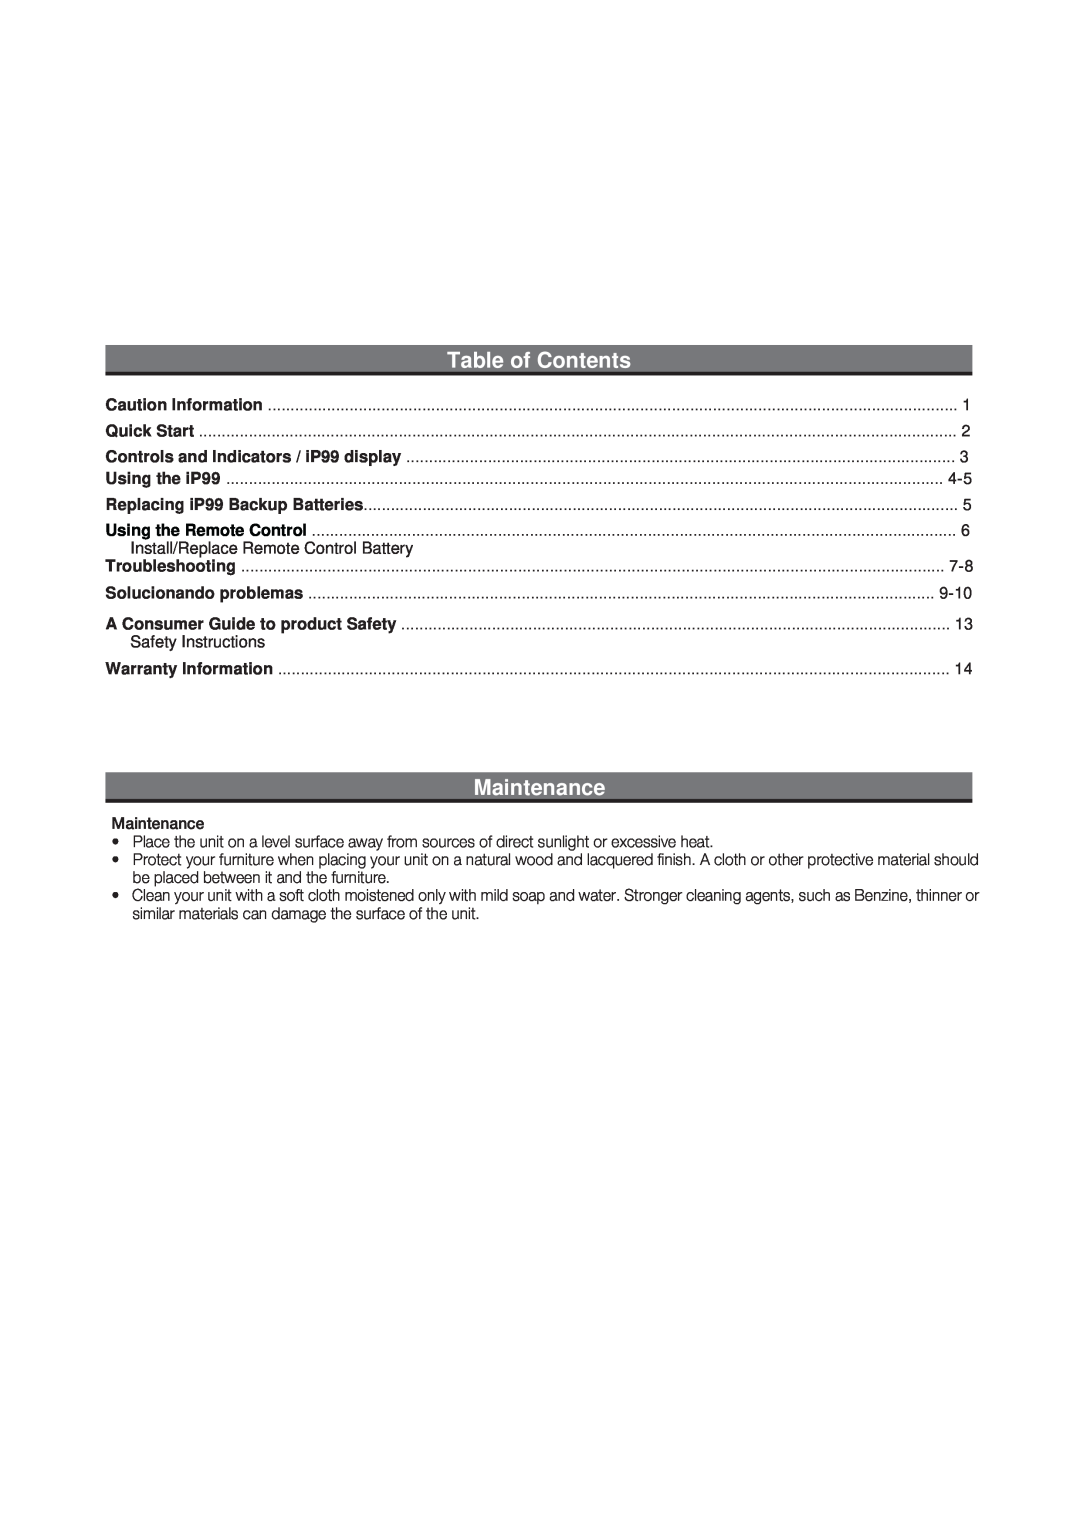 iHome iP99 manual Table of Contents, Maintenance 